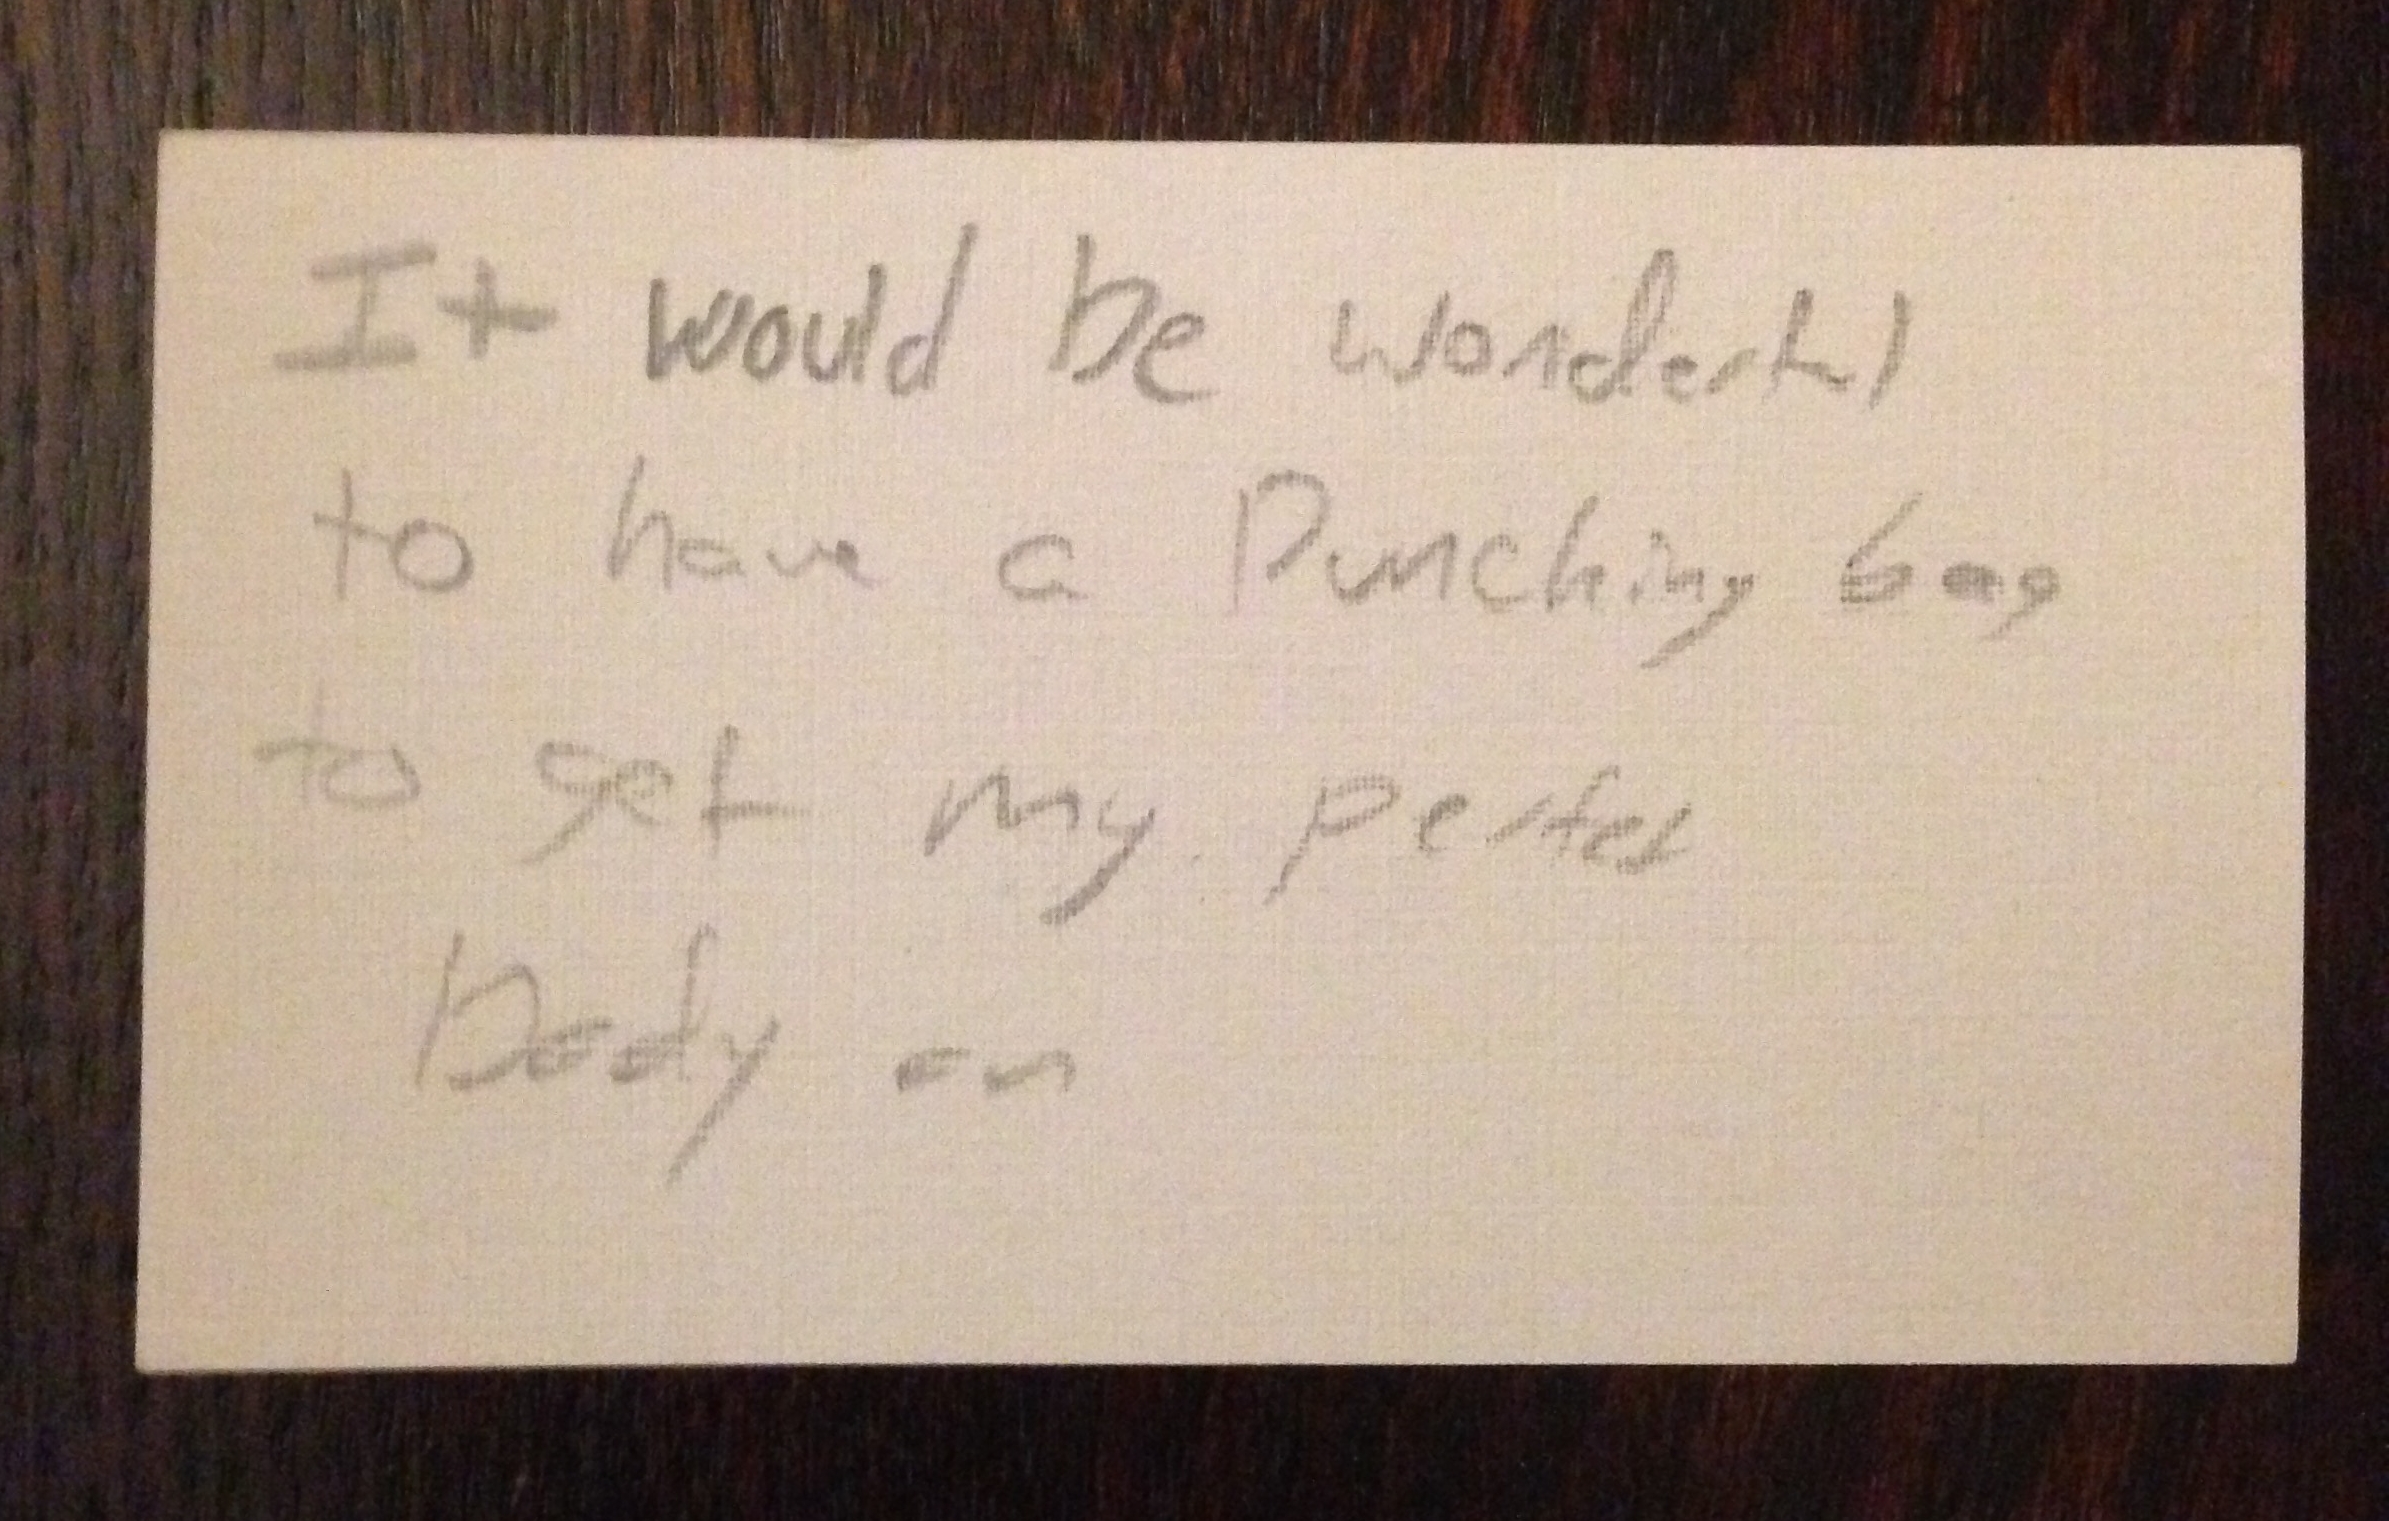 "It would be wonderful to have a punching bag to get my perfect body on." I never met the guy but I like him; I bet he's got a great sense of humor!